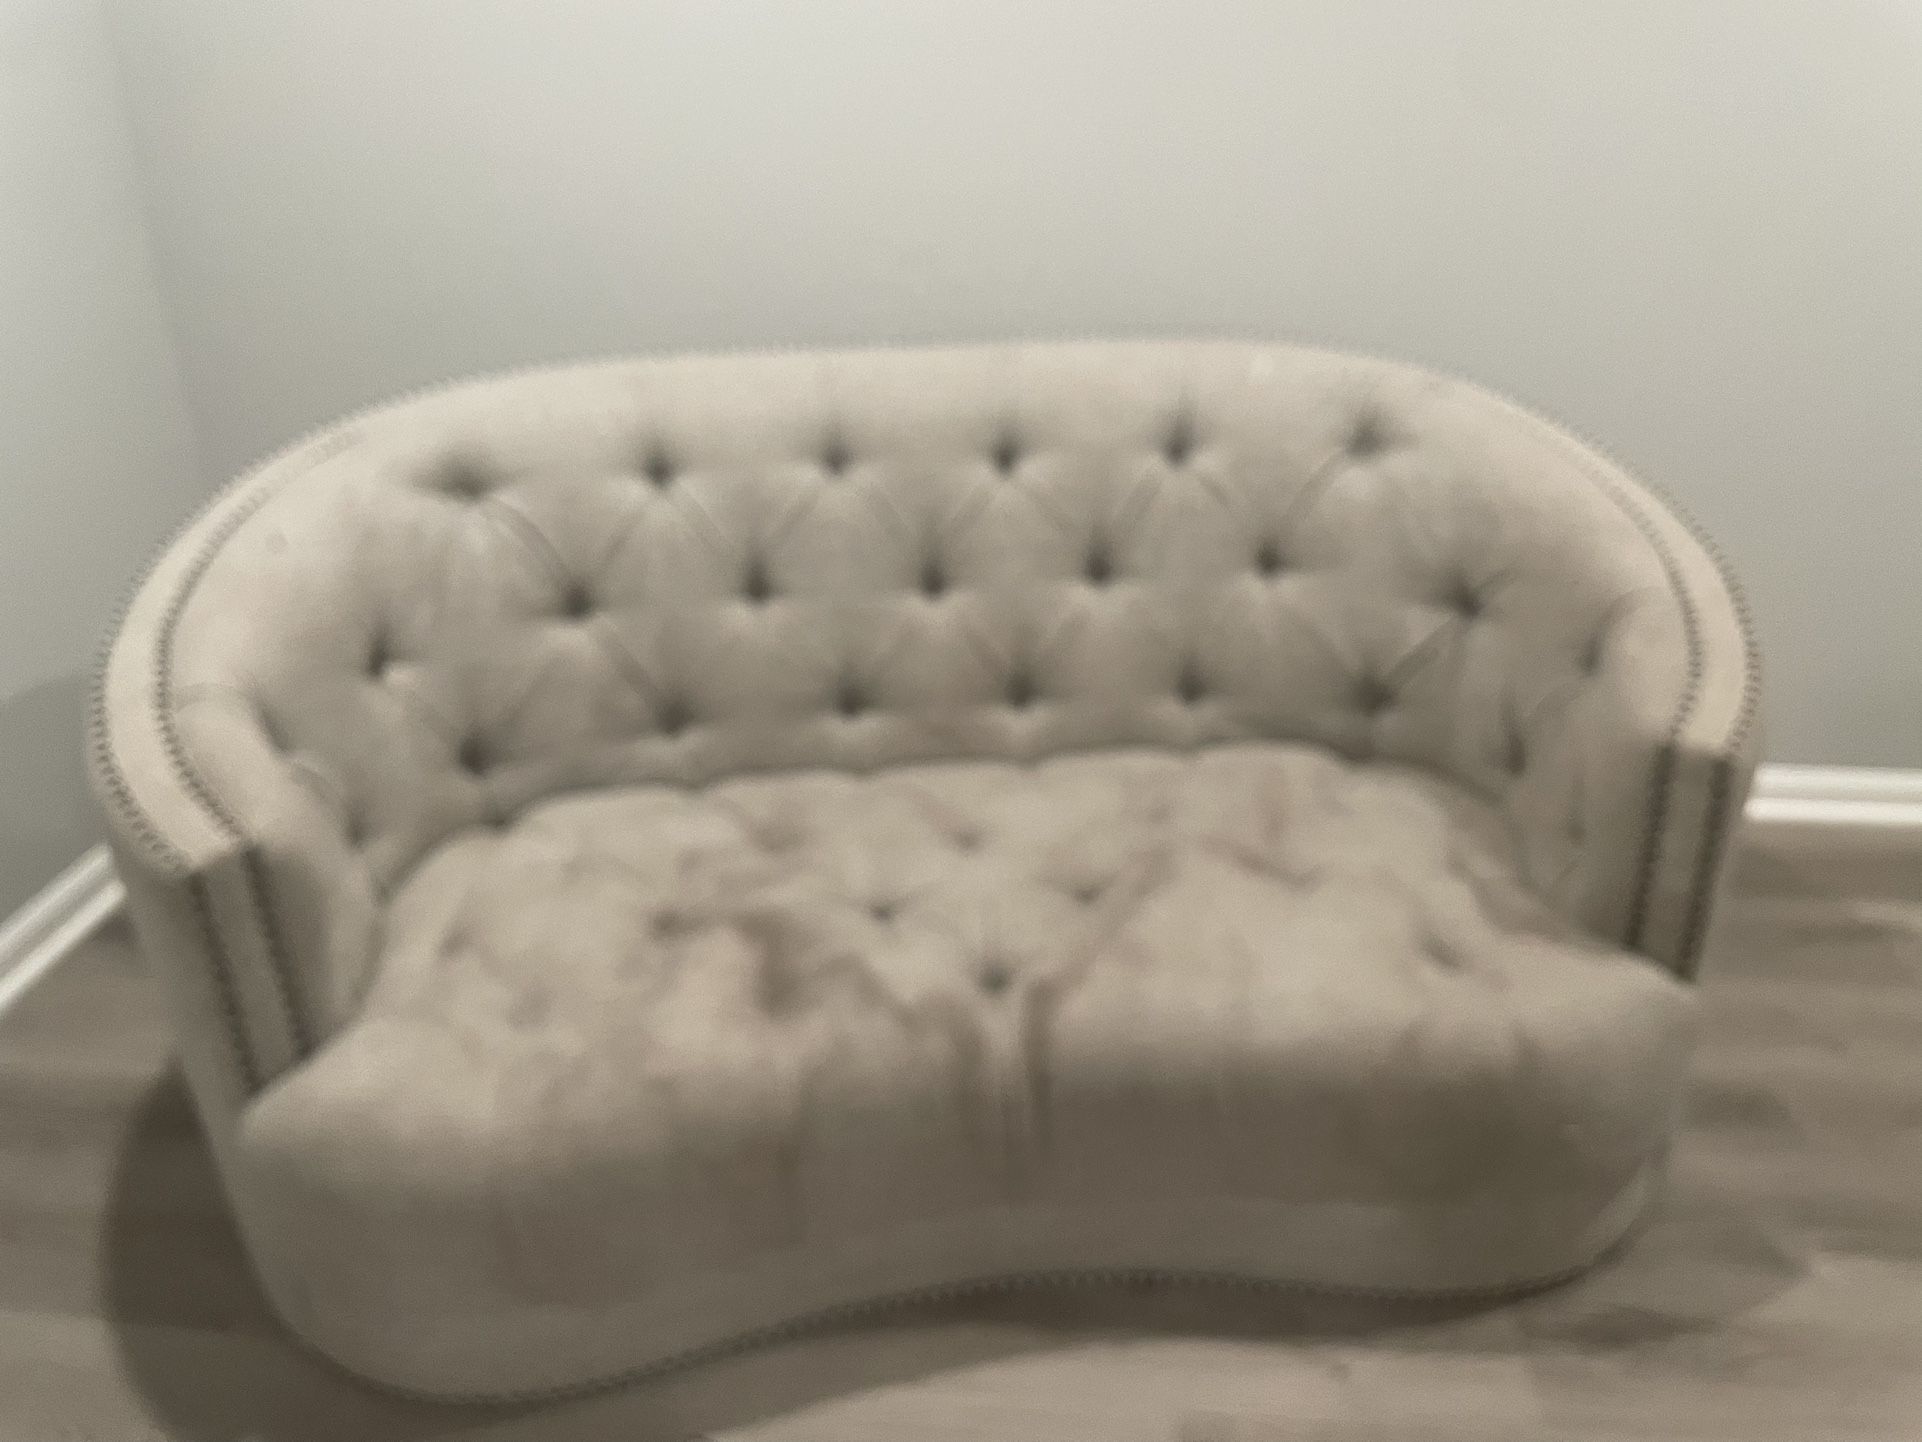 Used Couch Set